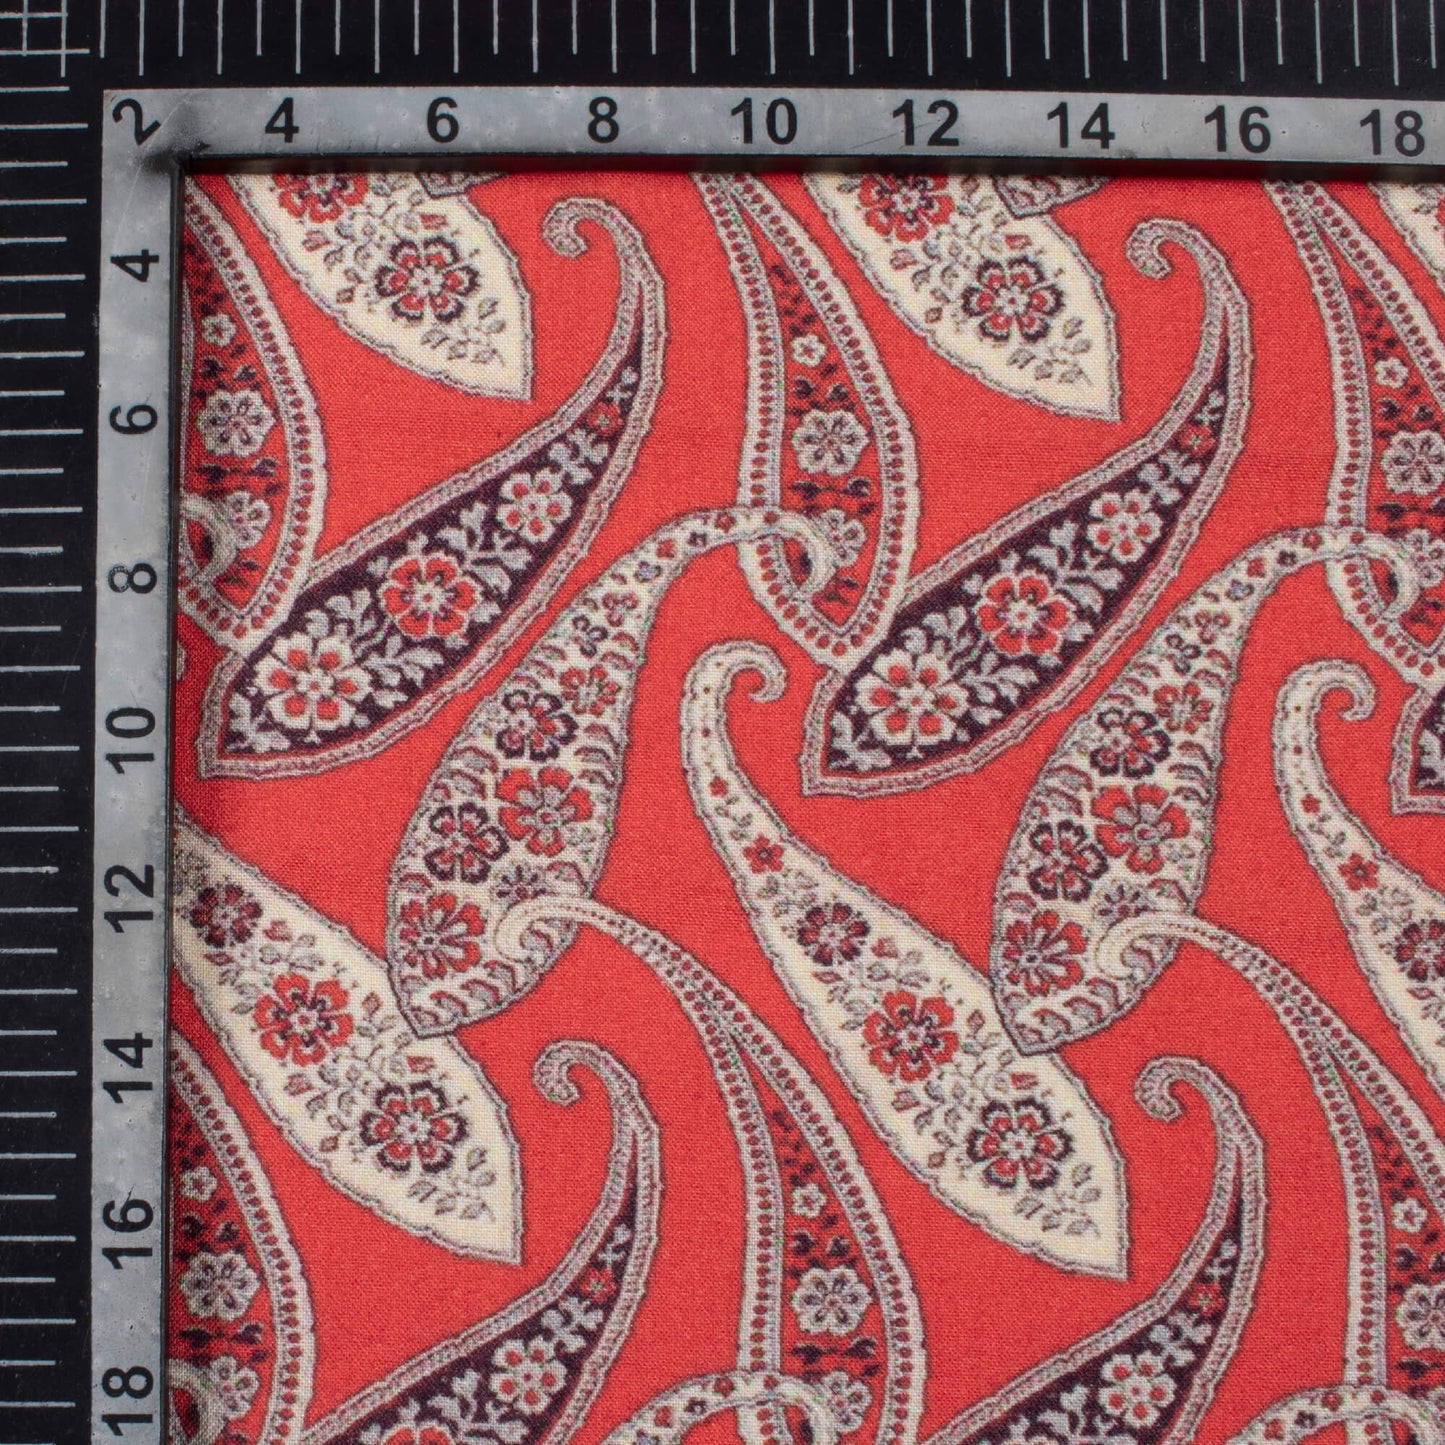 Vermilion Red And Beige Paisley Pattern Digital Print Viscose Rayon Fabric (Width 58 Inches)